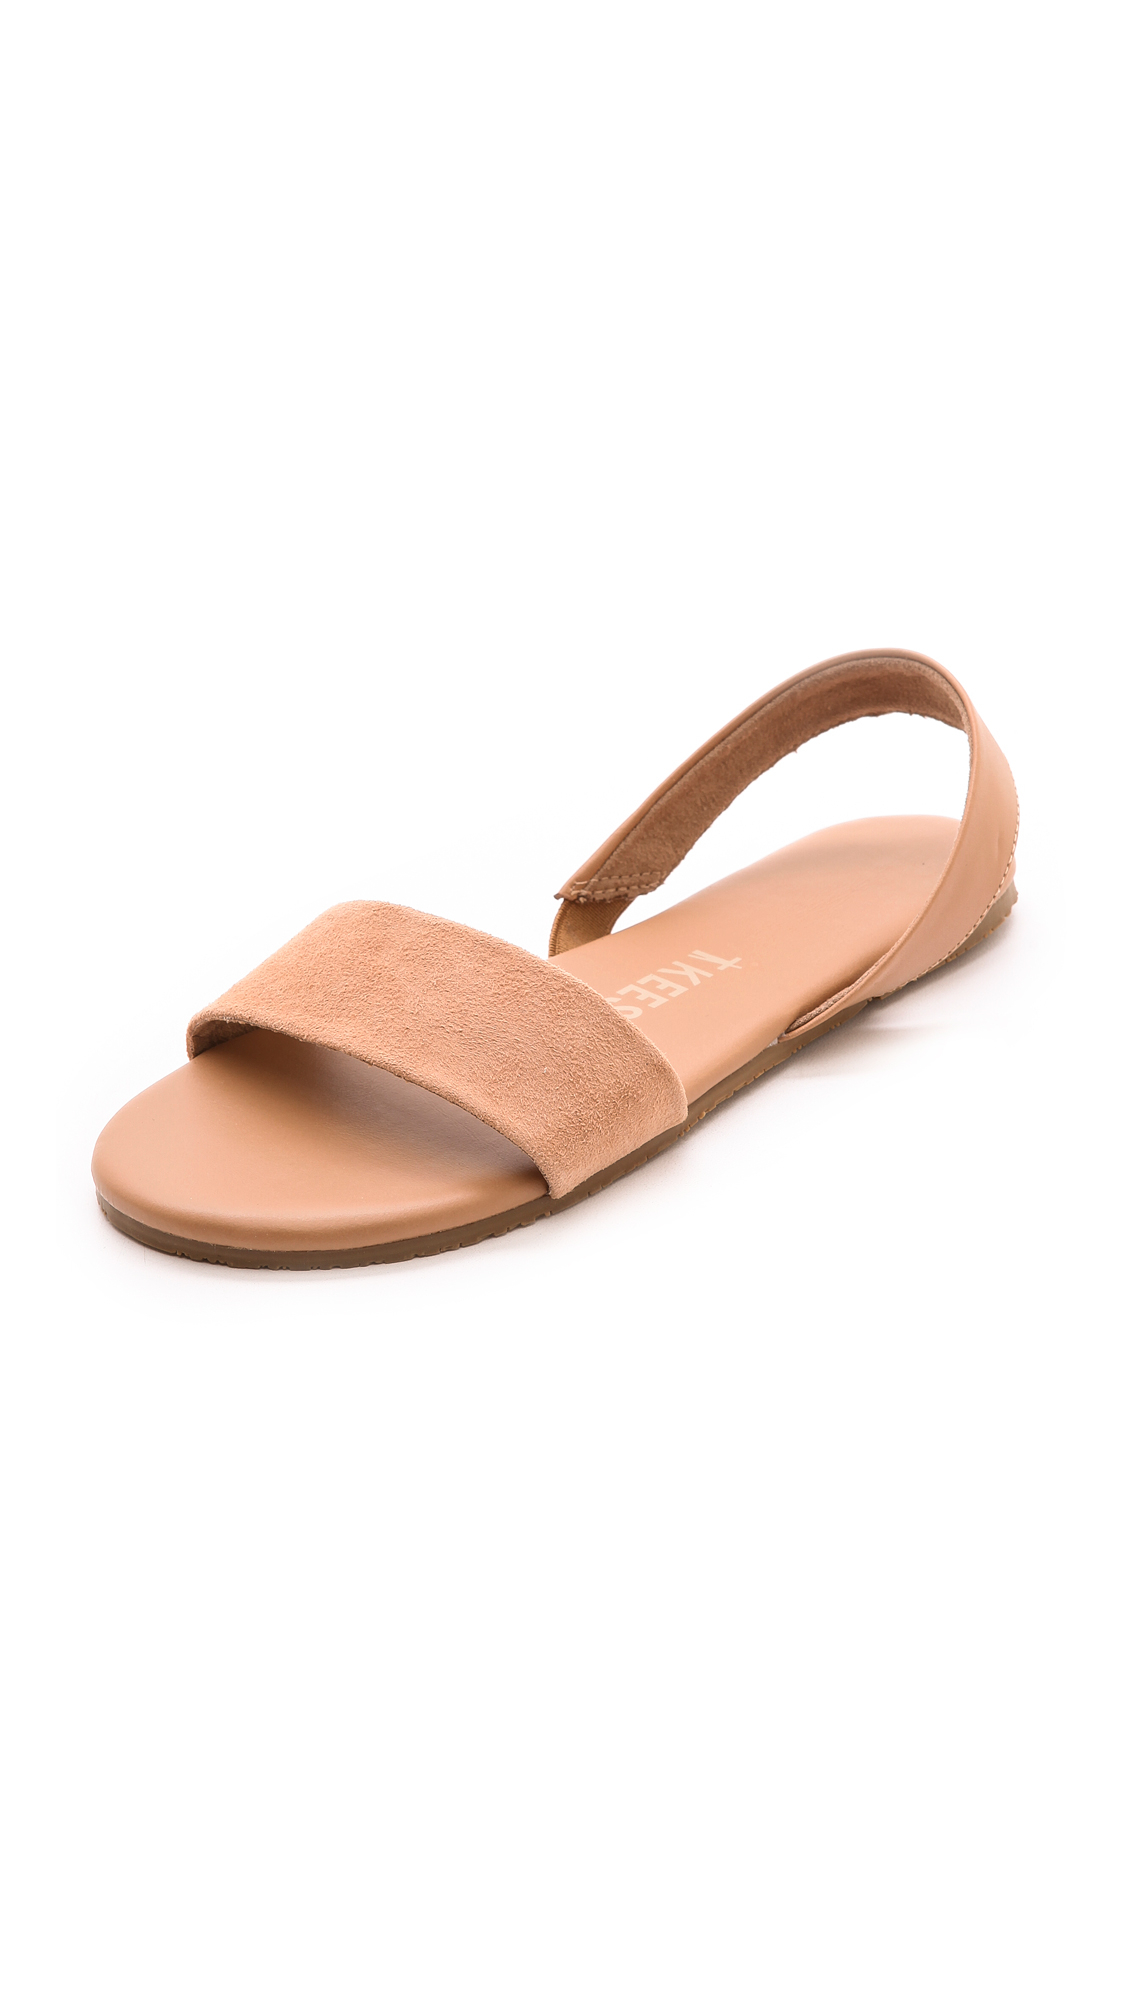 Lyst - Tkees Charlie Flat Sandals - Cocobutter in Natural